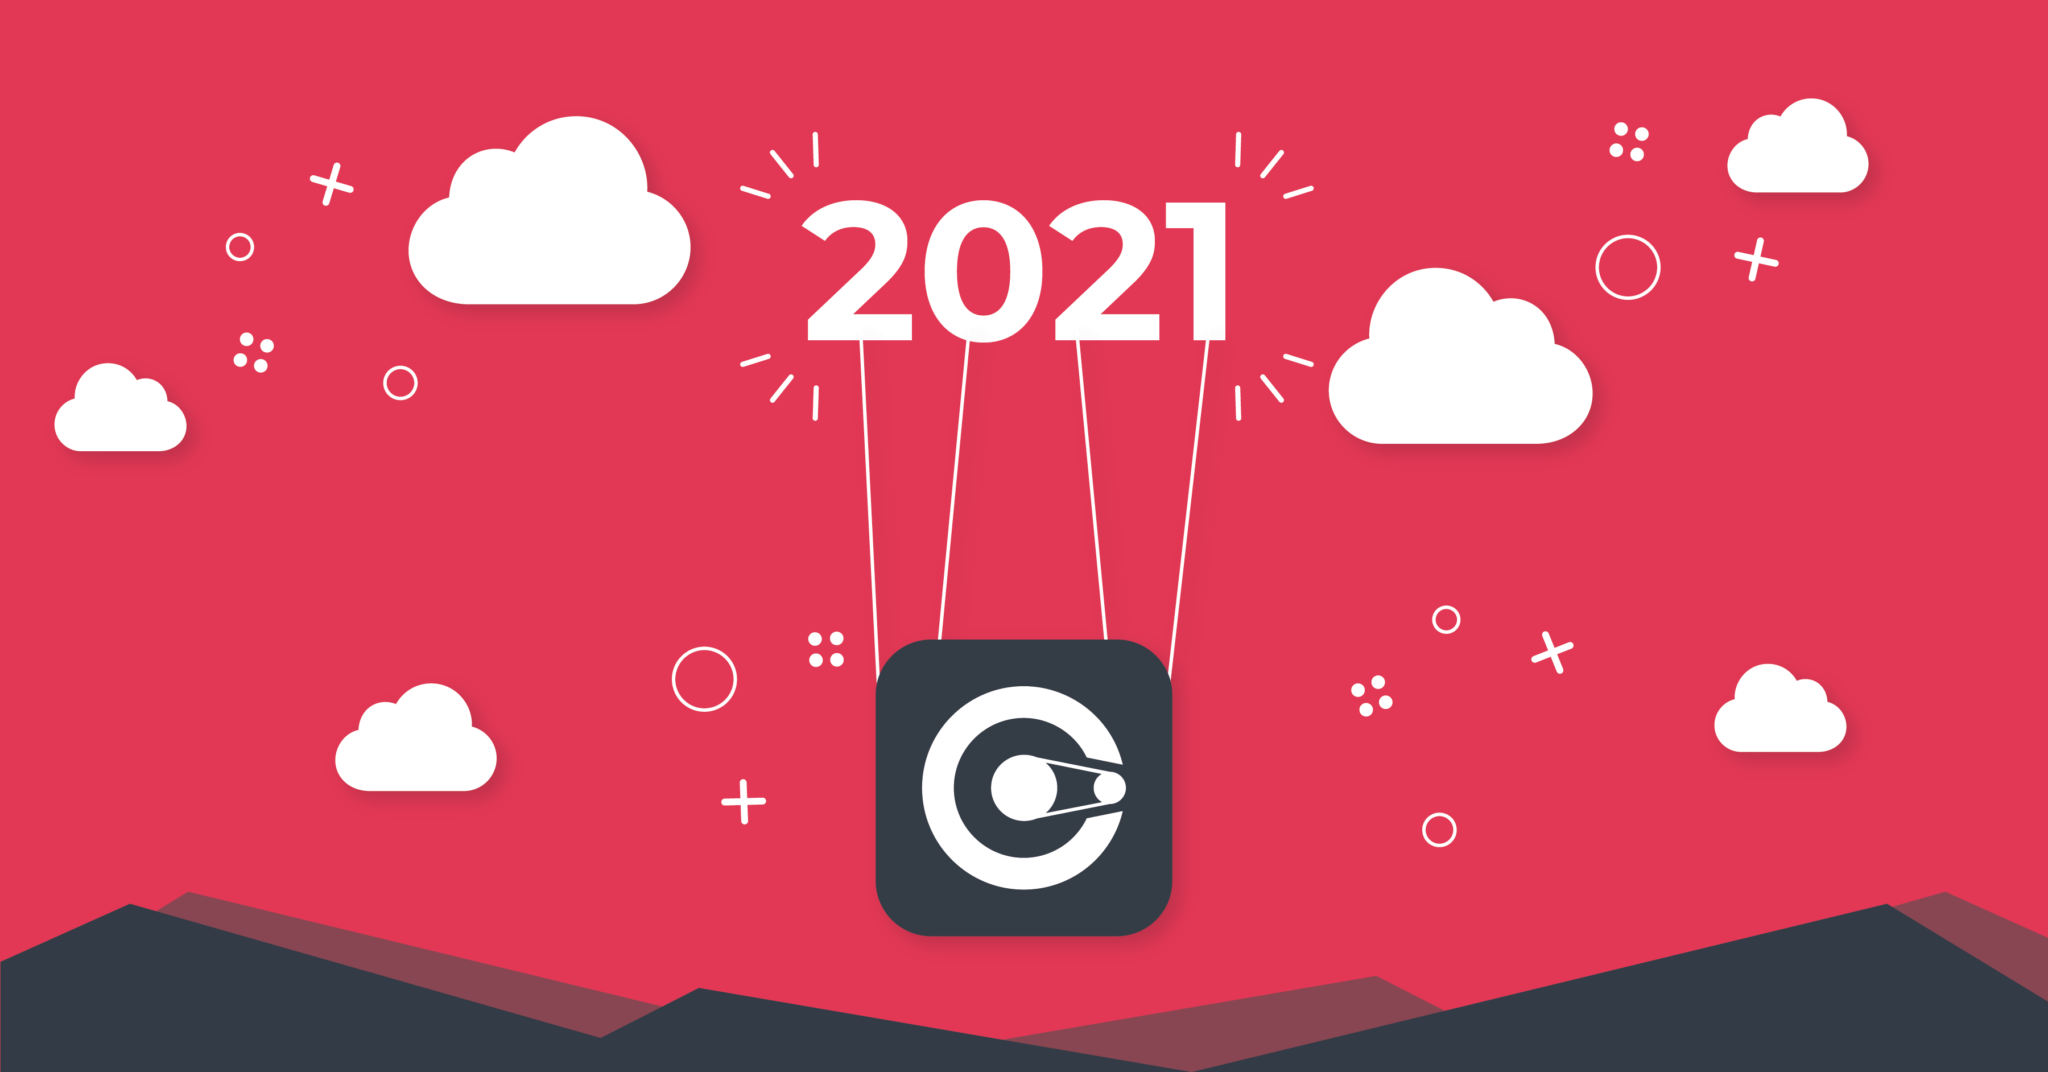 Cyclr's Growth in 2021